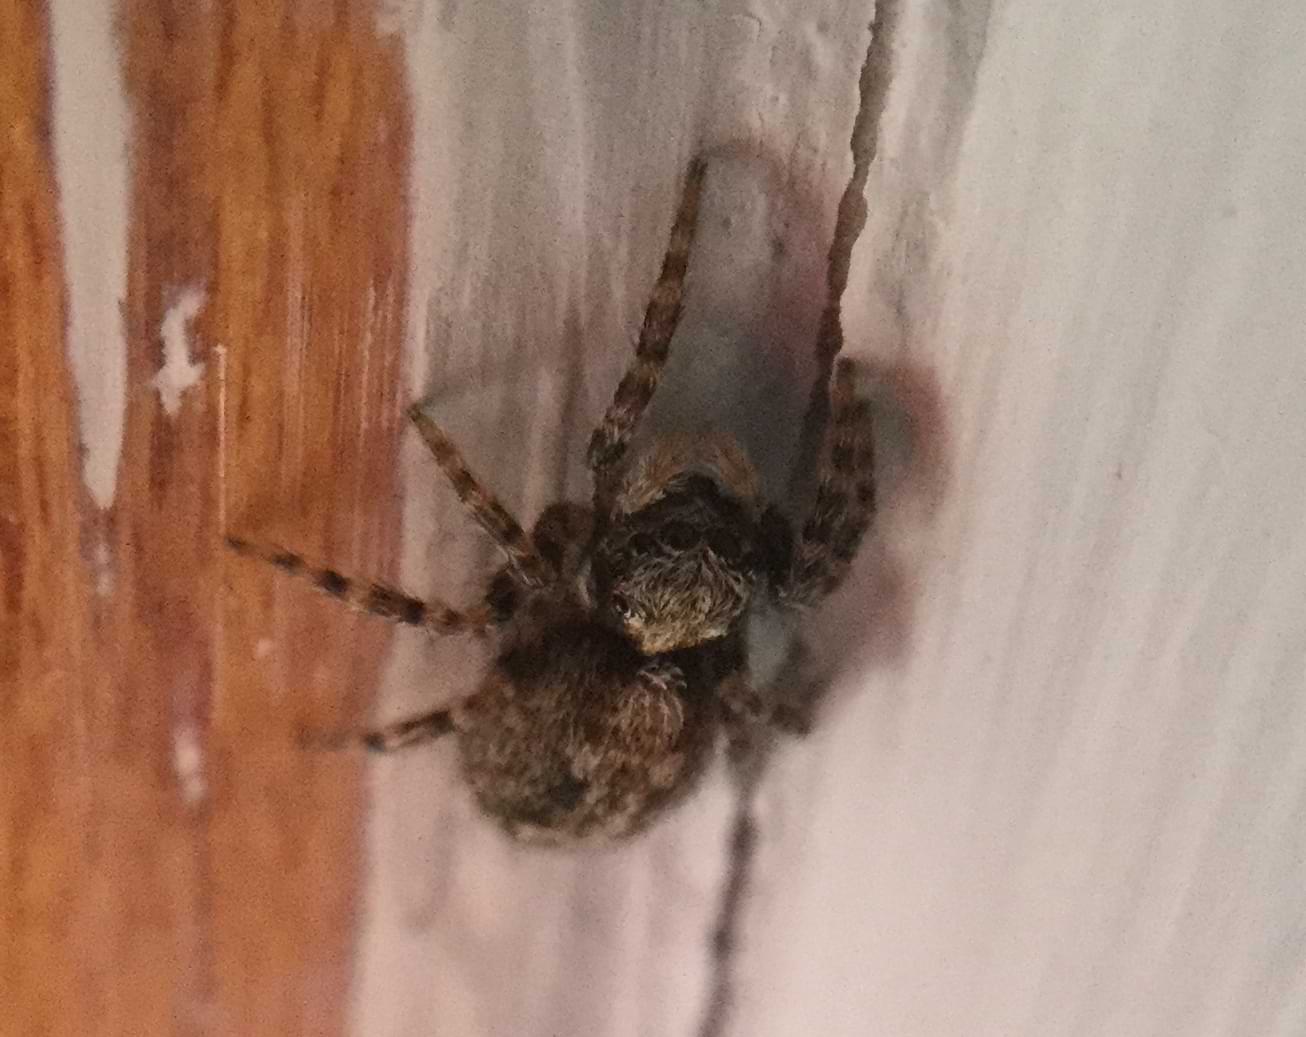 Another photo of the same brown spider. This one shows the spider's face which has four large eyes at the front and four smaller eyes to the sides.